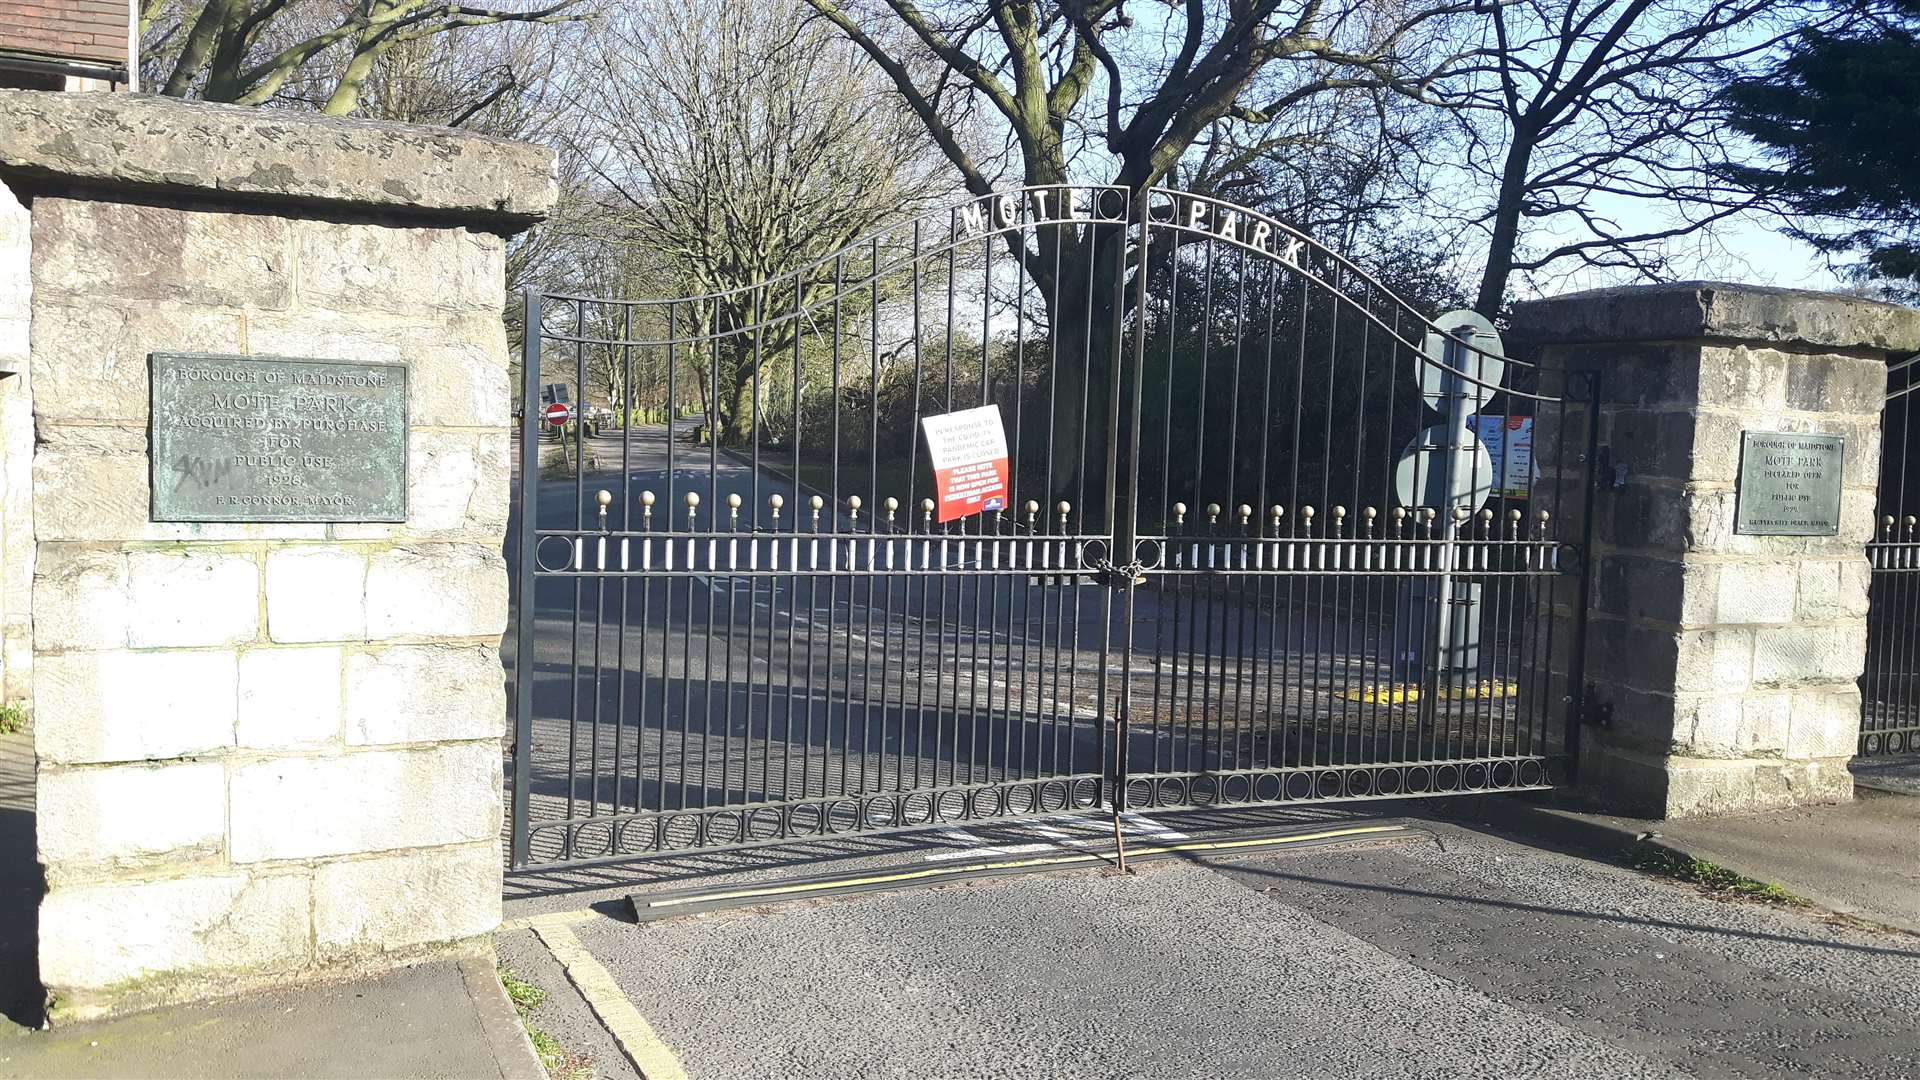 The gates to Mote Park in Maidstone are locked - the park is closed to cars